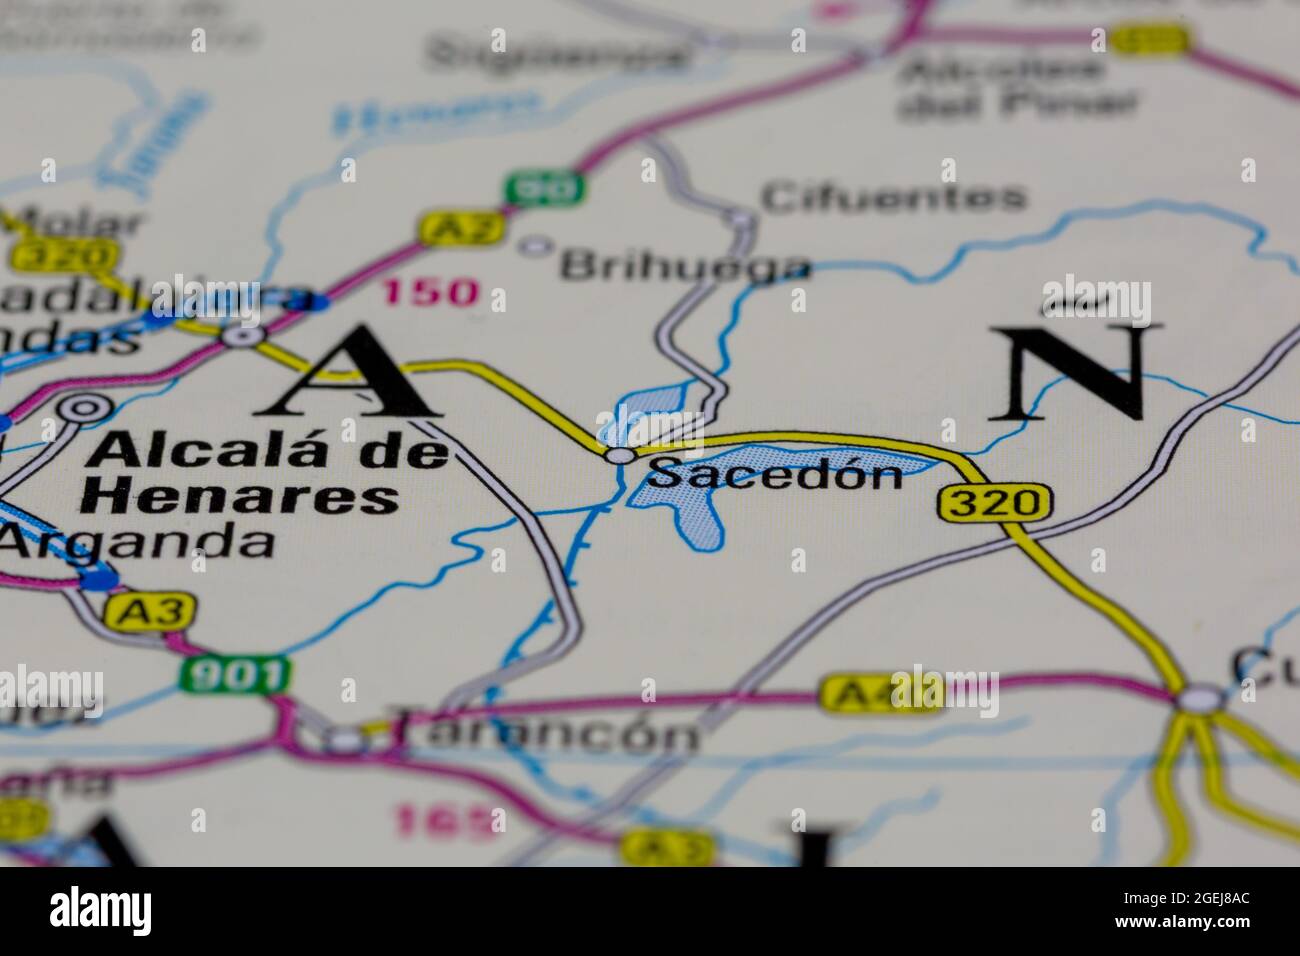 Sacedon Spain shown on a road map or Geography map Stock Photo